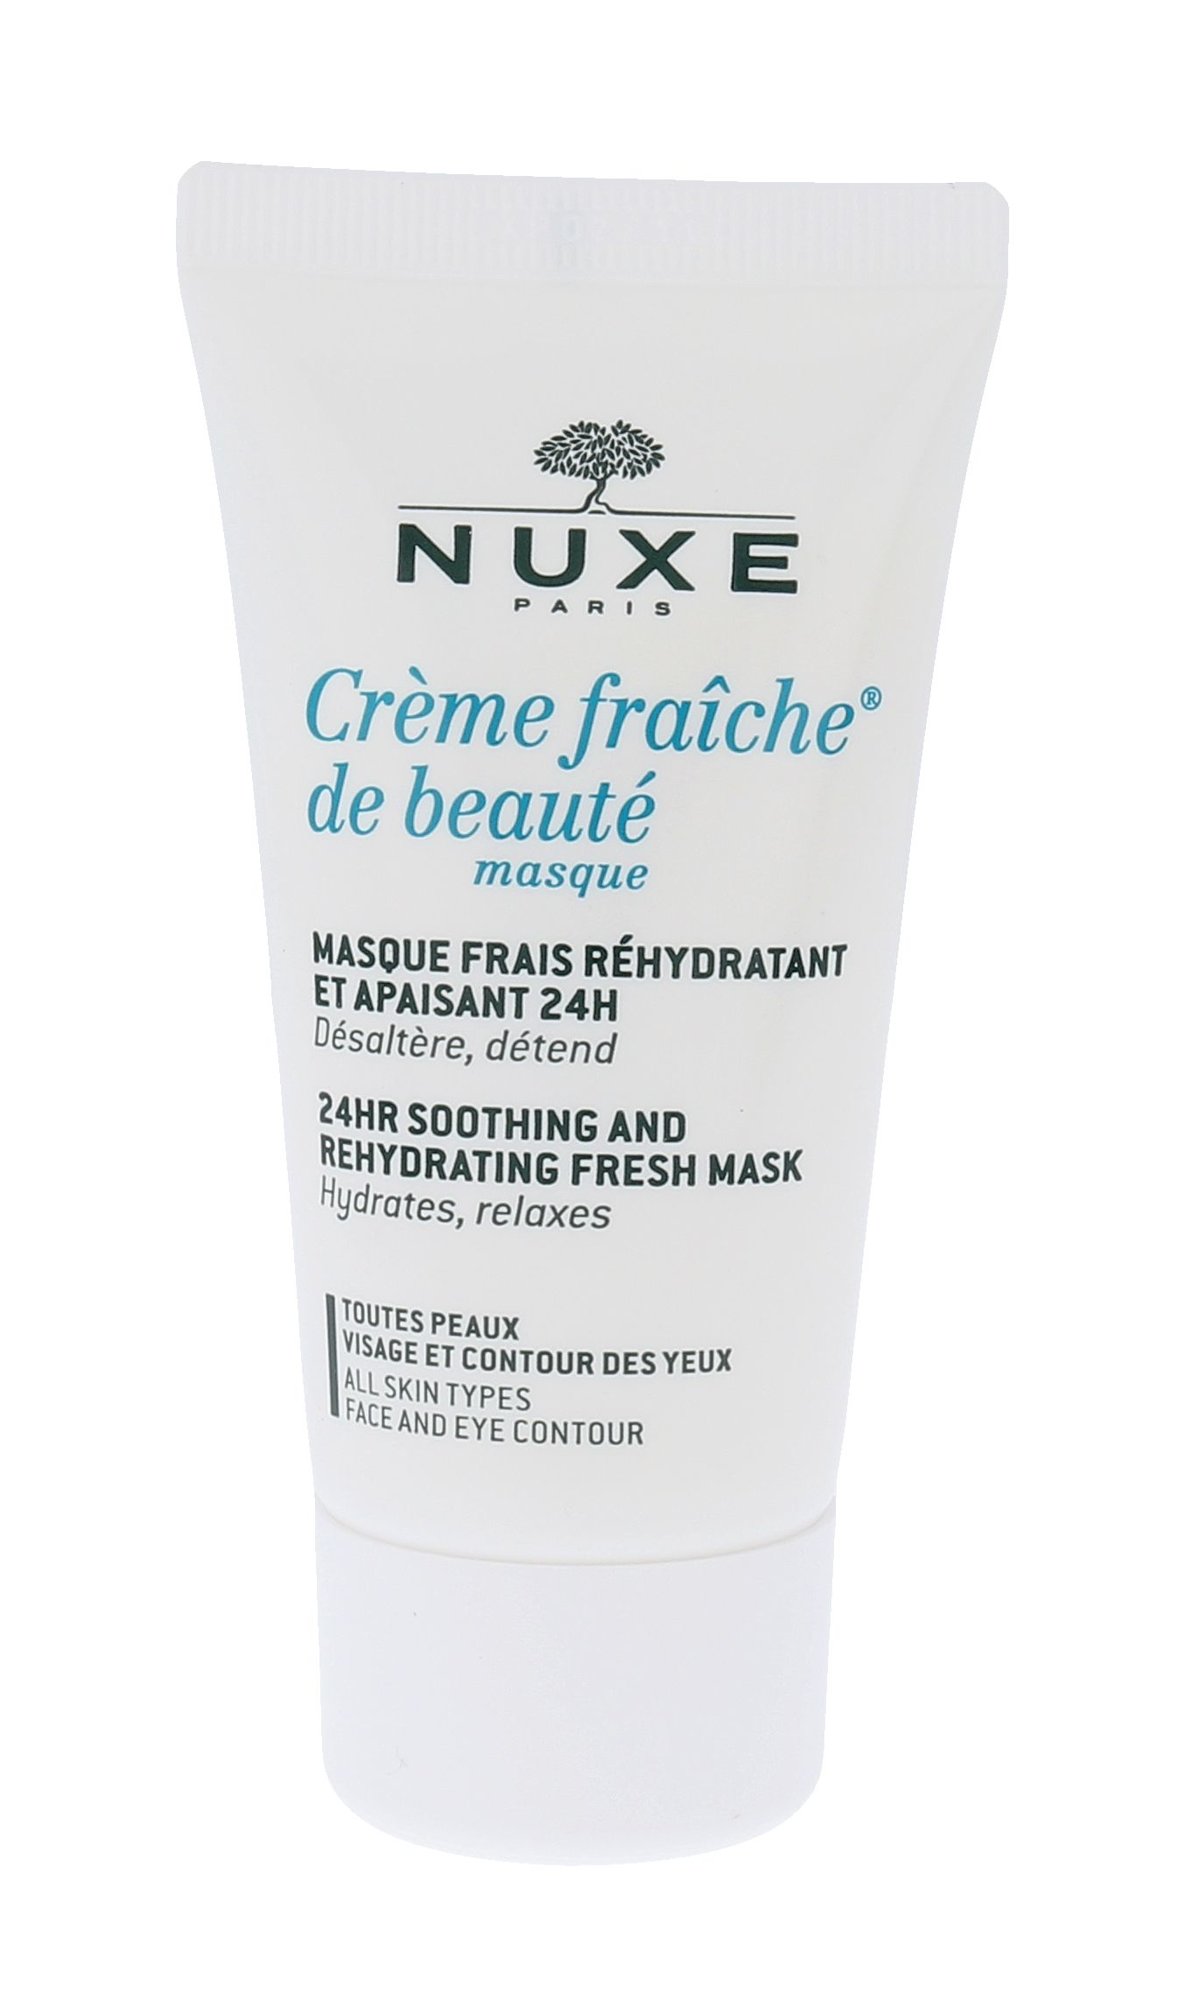 Nuxe Creme Fraiche 24hr Soothing Mask